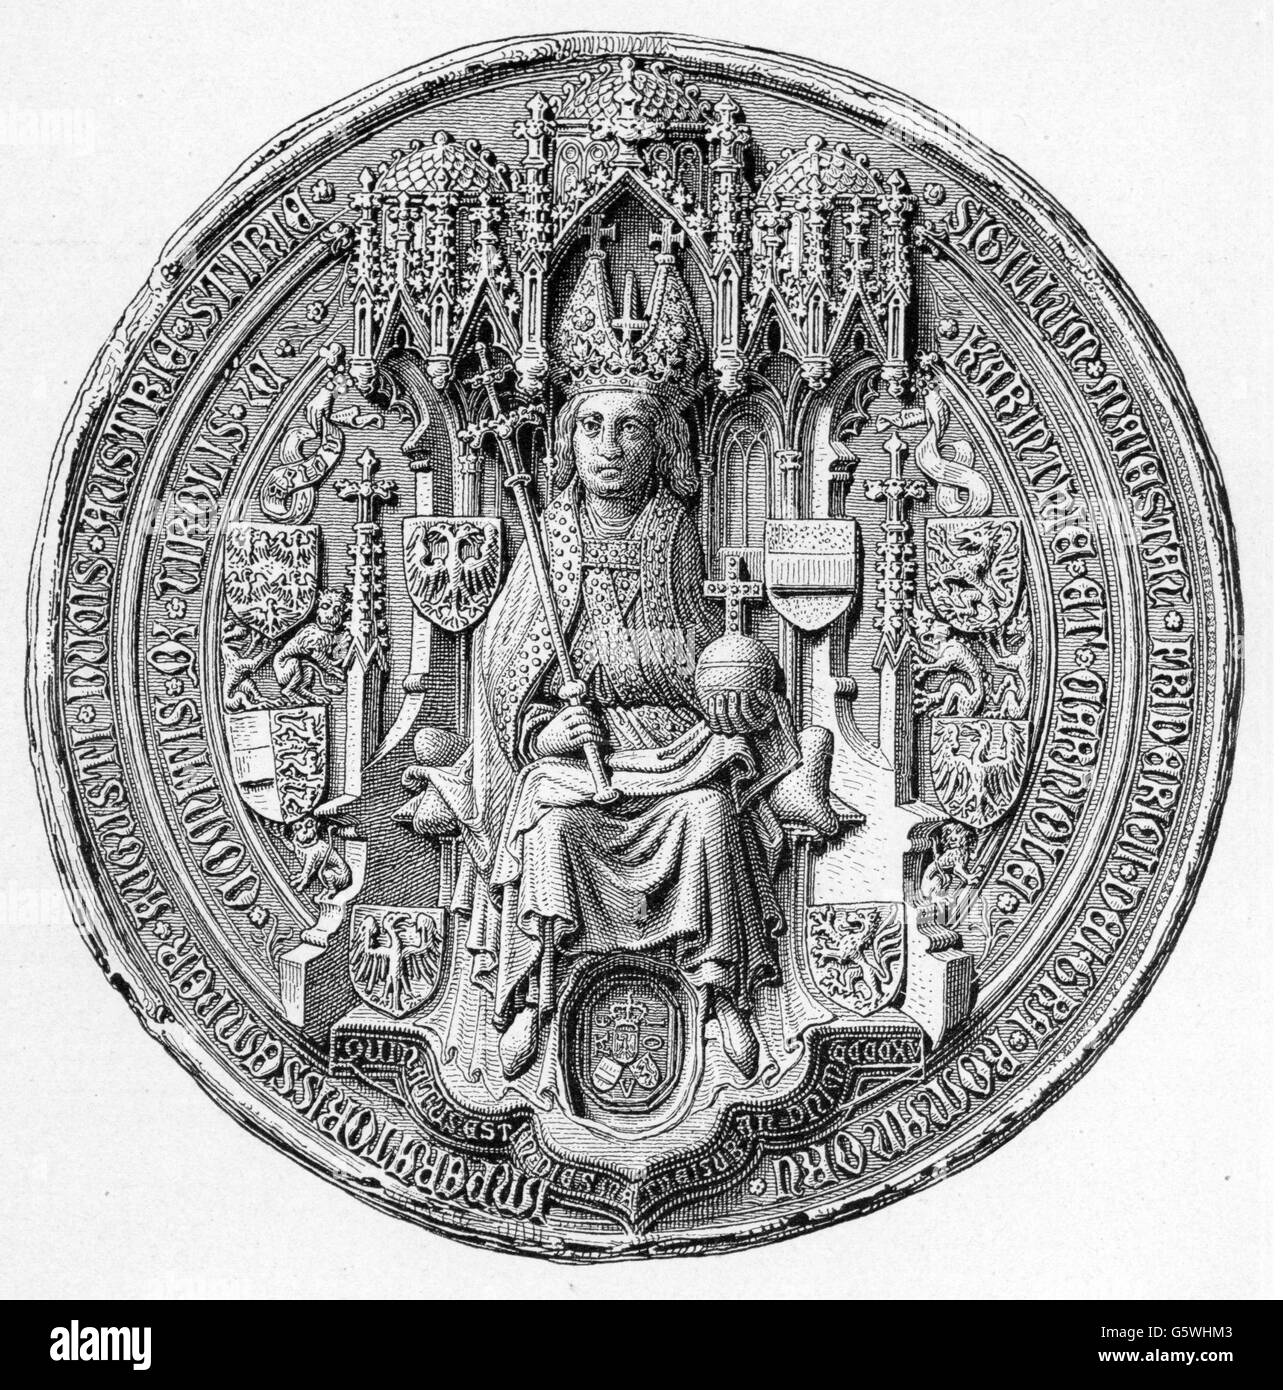 Frederick III 'the Peaceful', 21.9.1415 - 19.8.1493, Holy Roman Emperor 16.3.1452 - 19.8.1493, full length, seal, obverse, 15th century, wood engraving, 19th century, Stock Photo